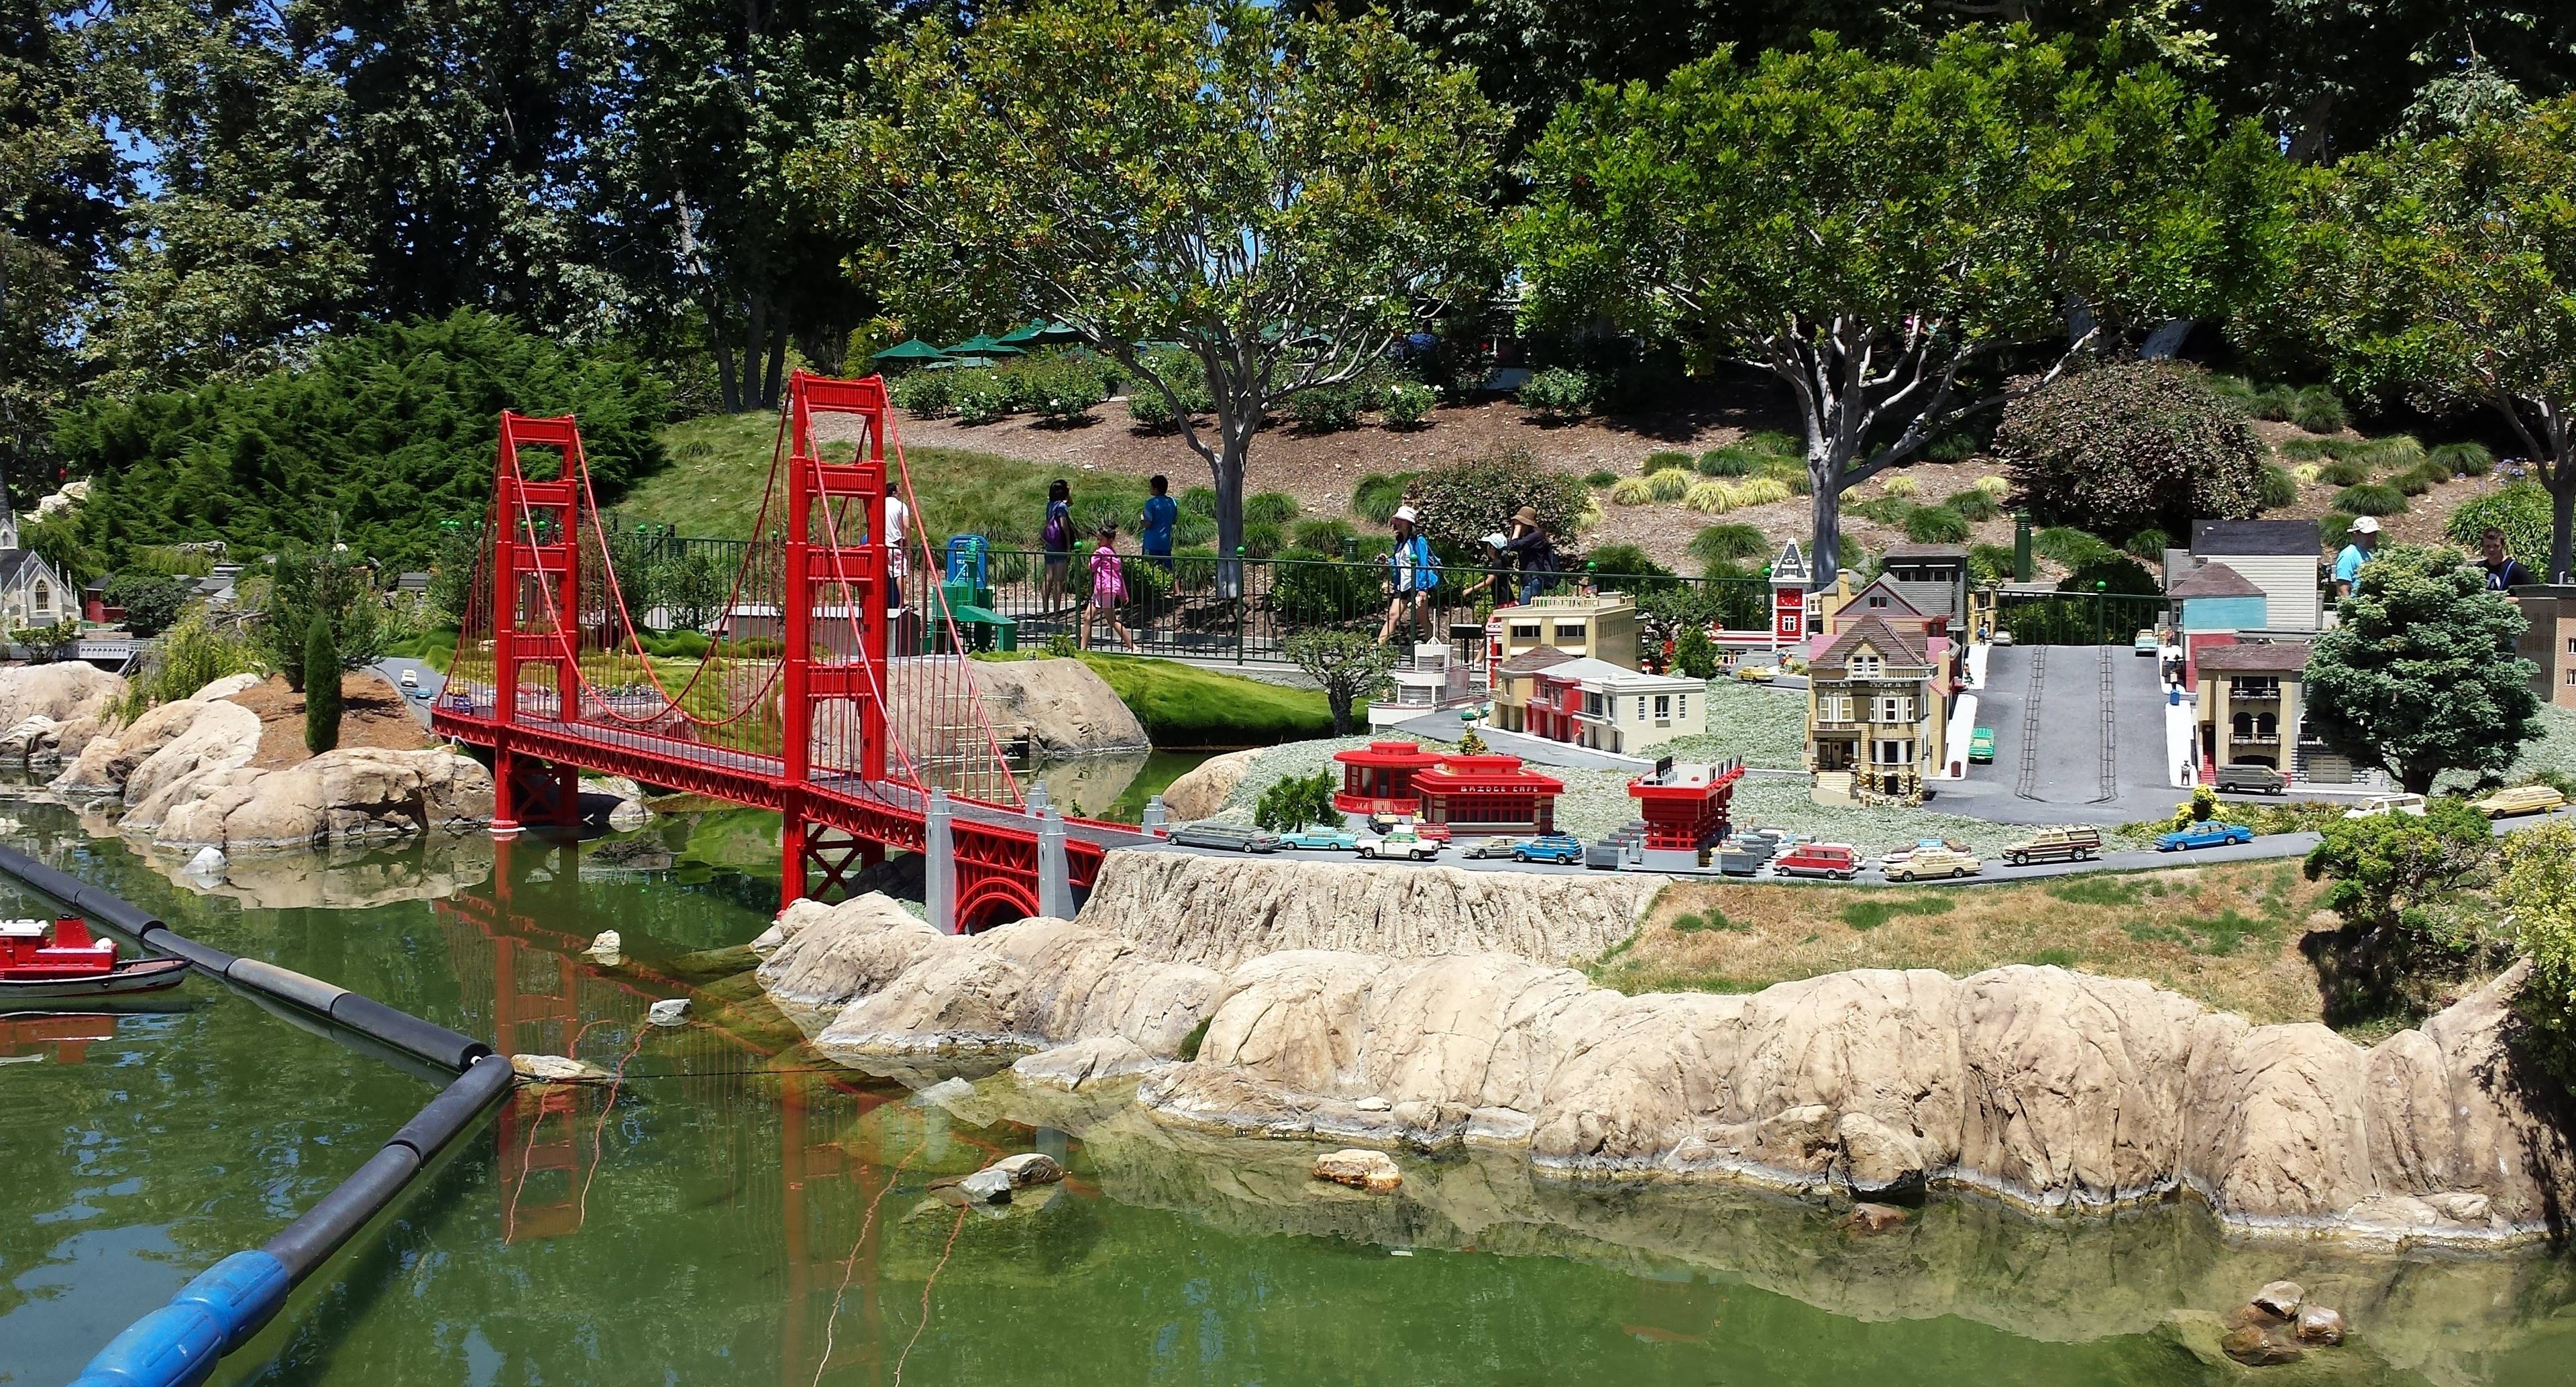 Travel to San Diego by Way of Legoland